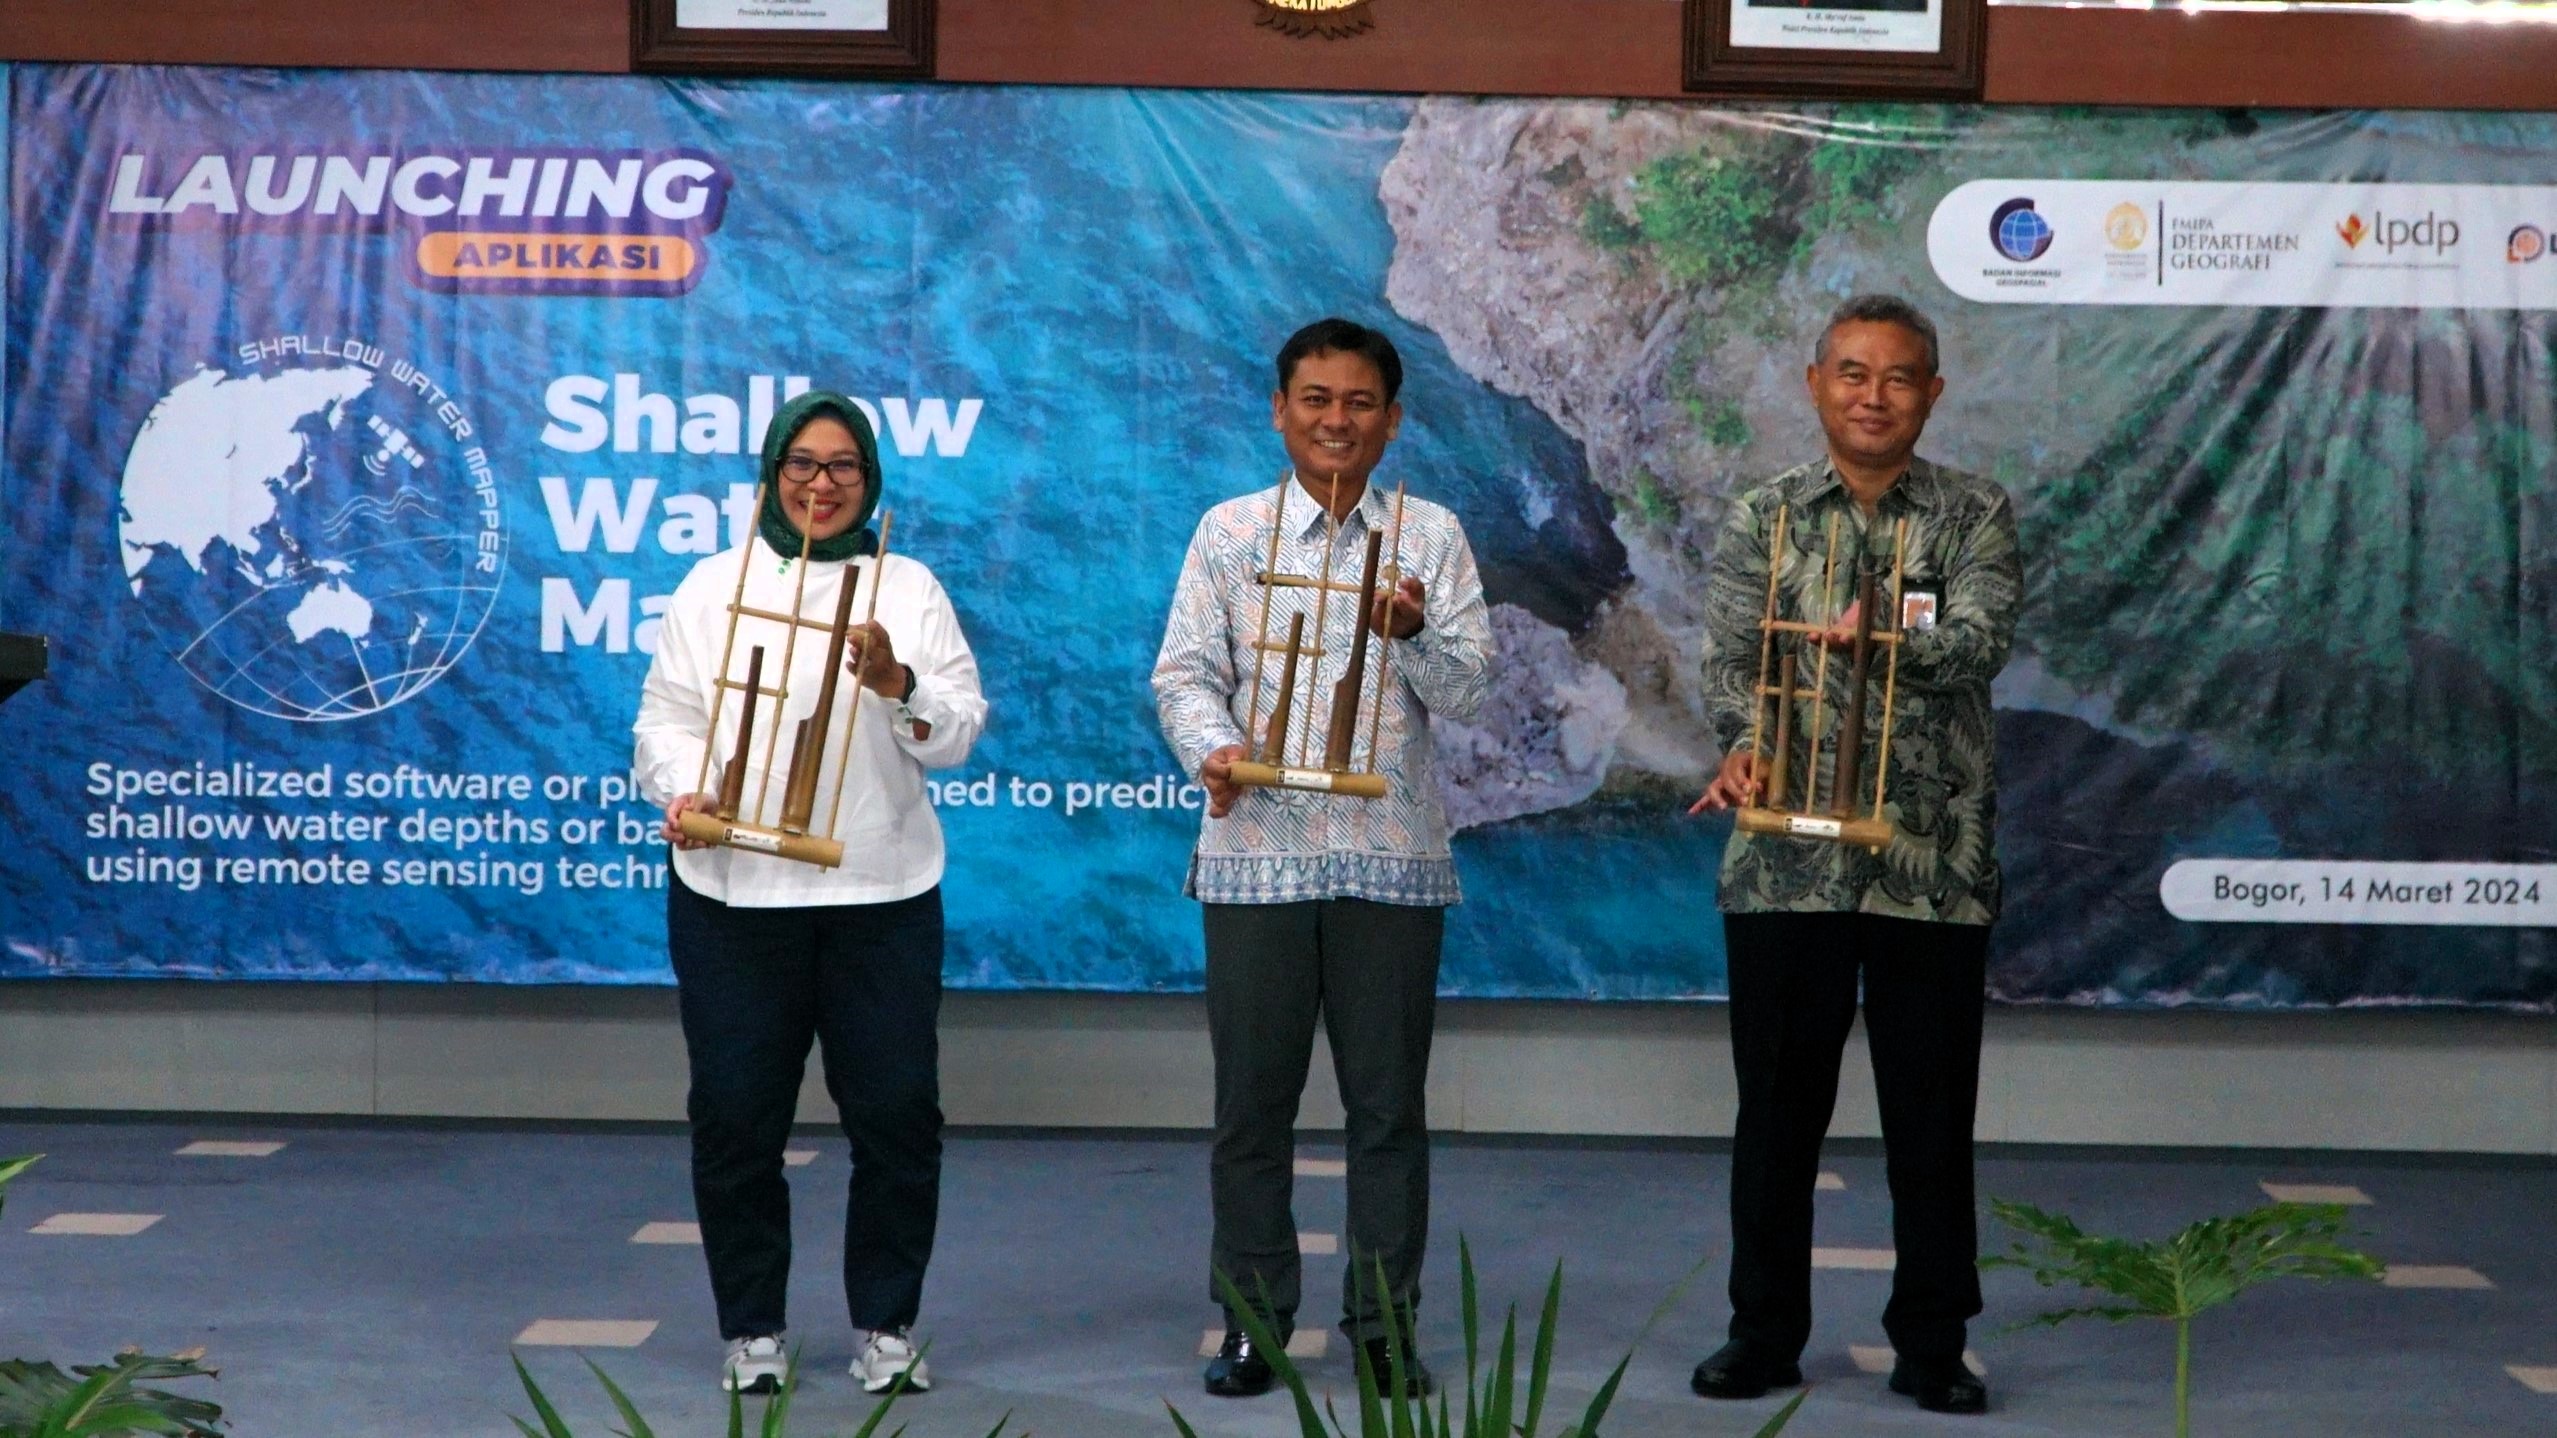 Launch of Shallow Water Mapper, Advanced Application for Satellite-Based Seafloor Mapping